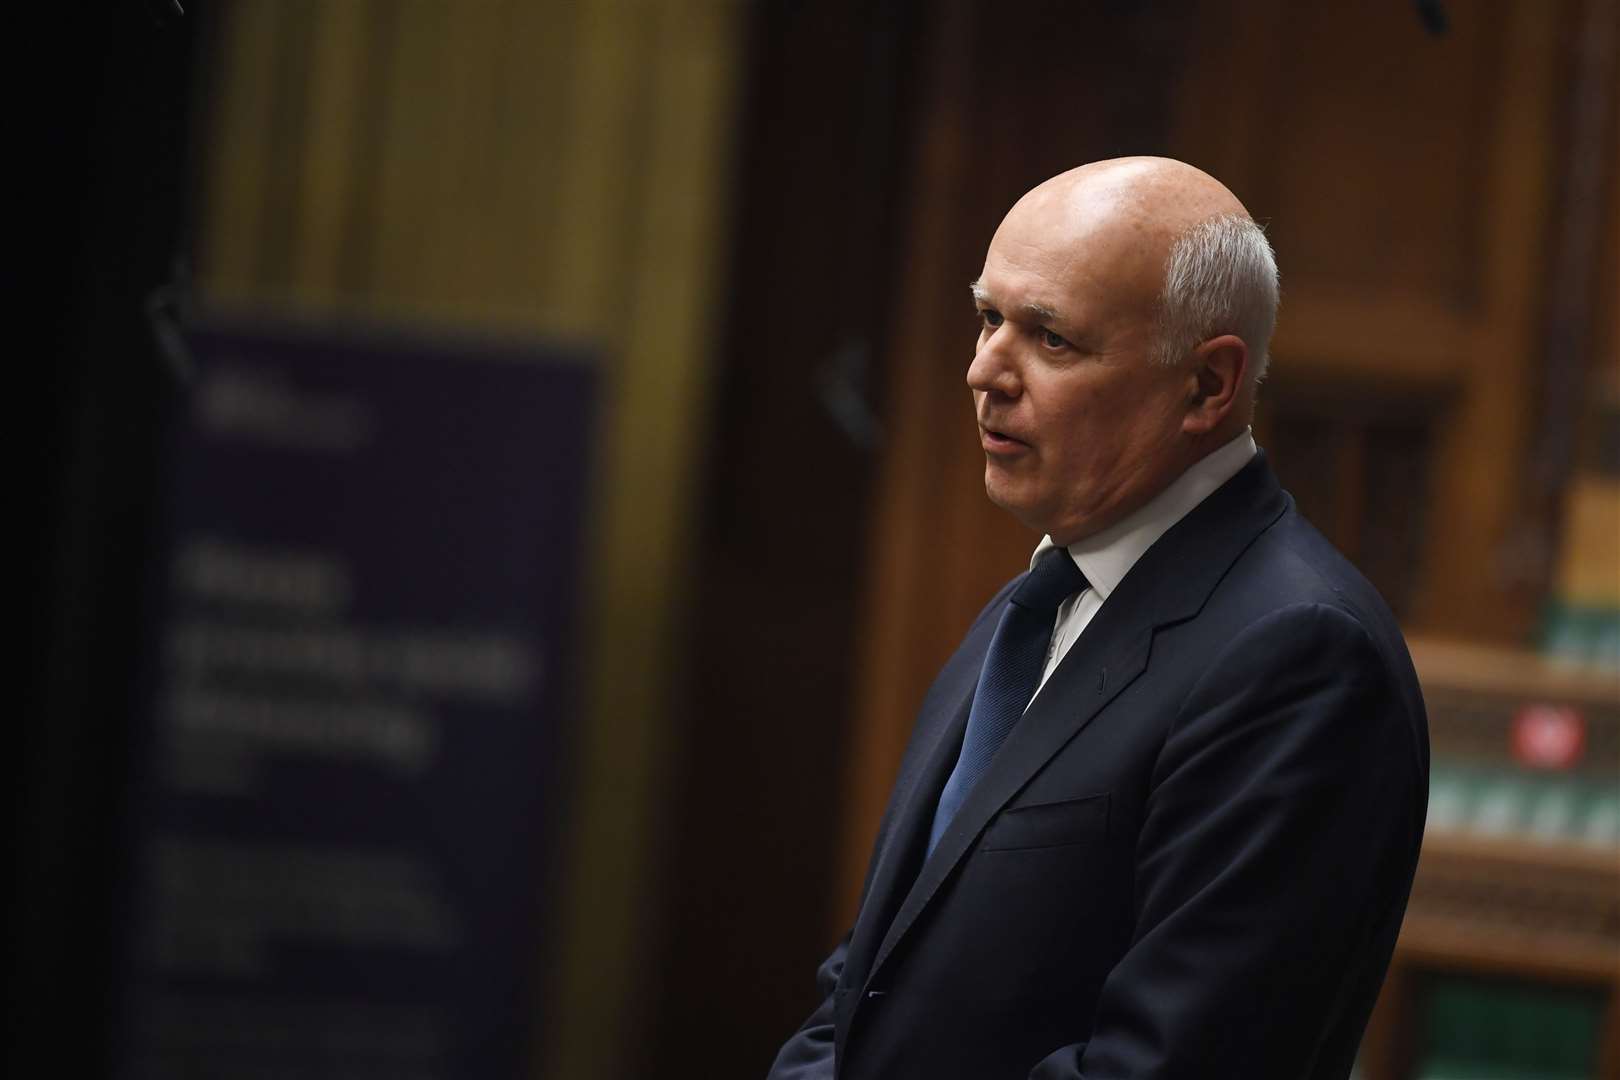 Sir Iain Duncan Smith said the PM ‘lost control’ of No 10 (UK Parliament/Jessica Taylor)